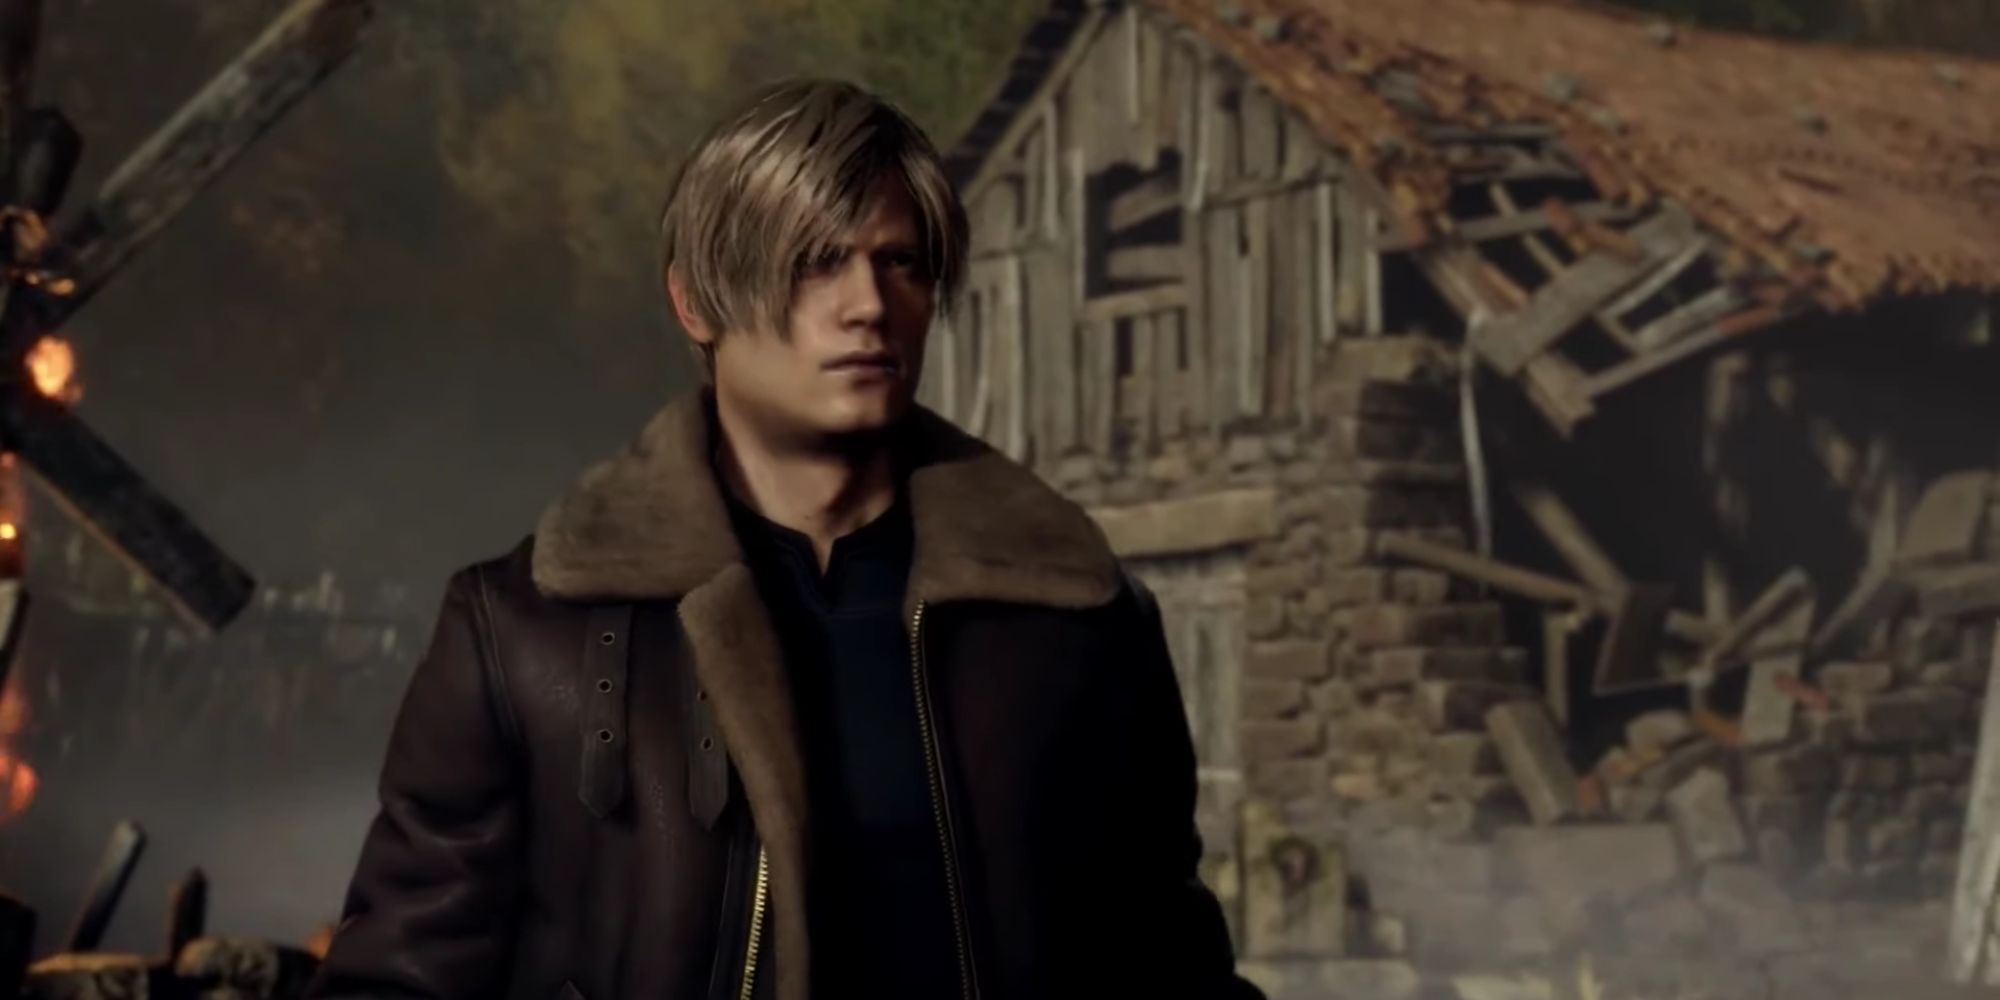 Leon in Resident Evil 4 Remake thinking about bingo.